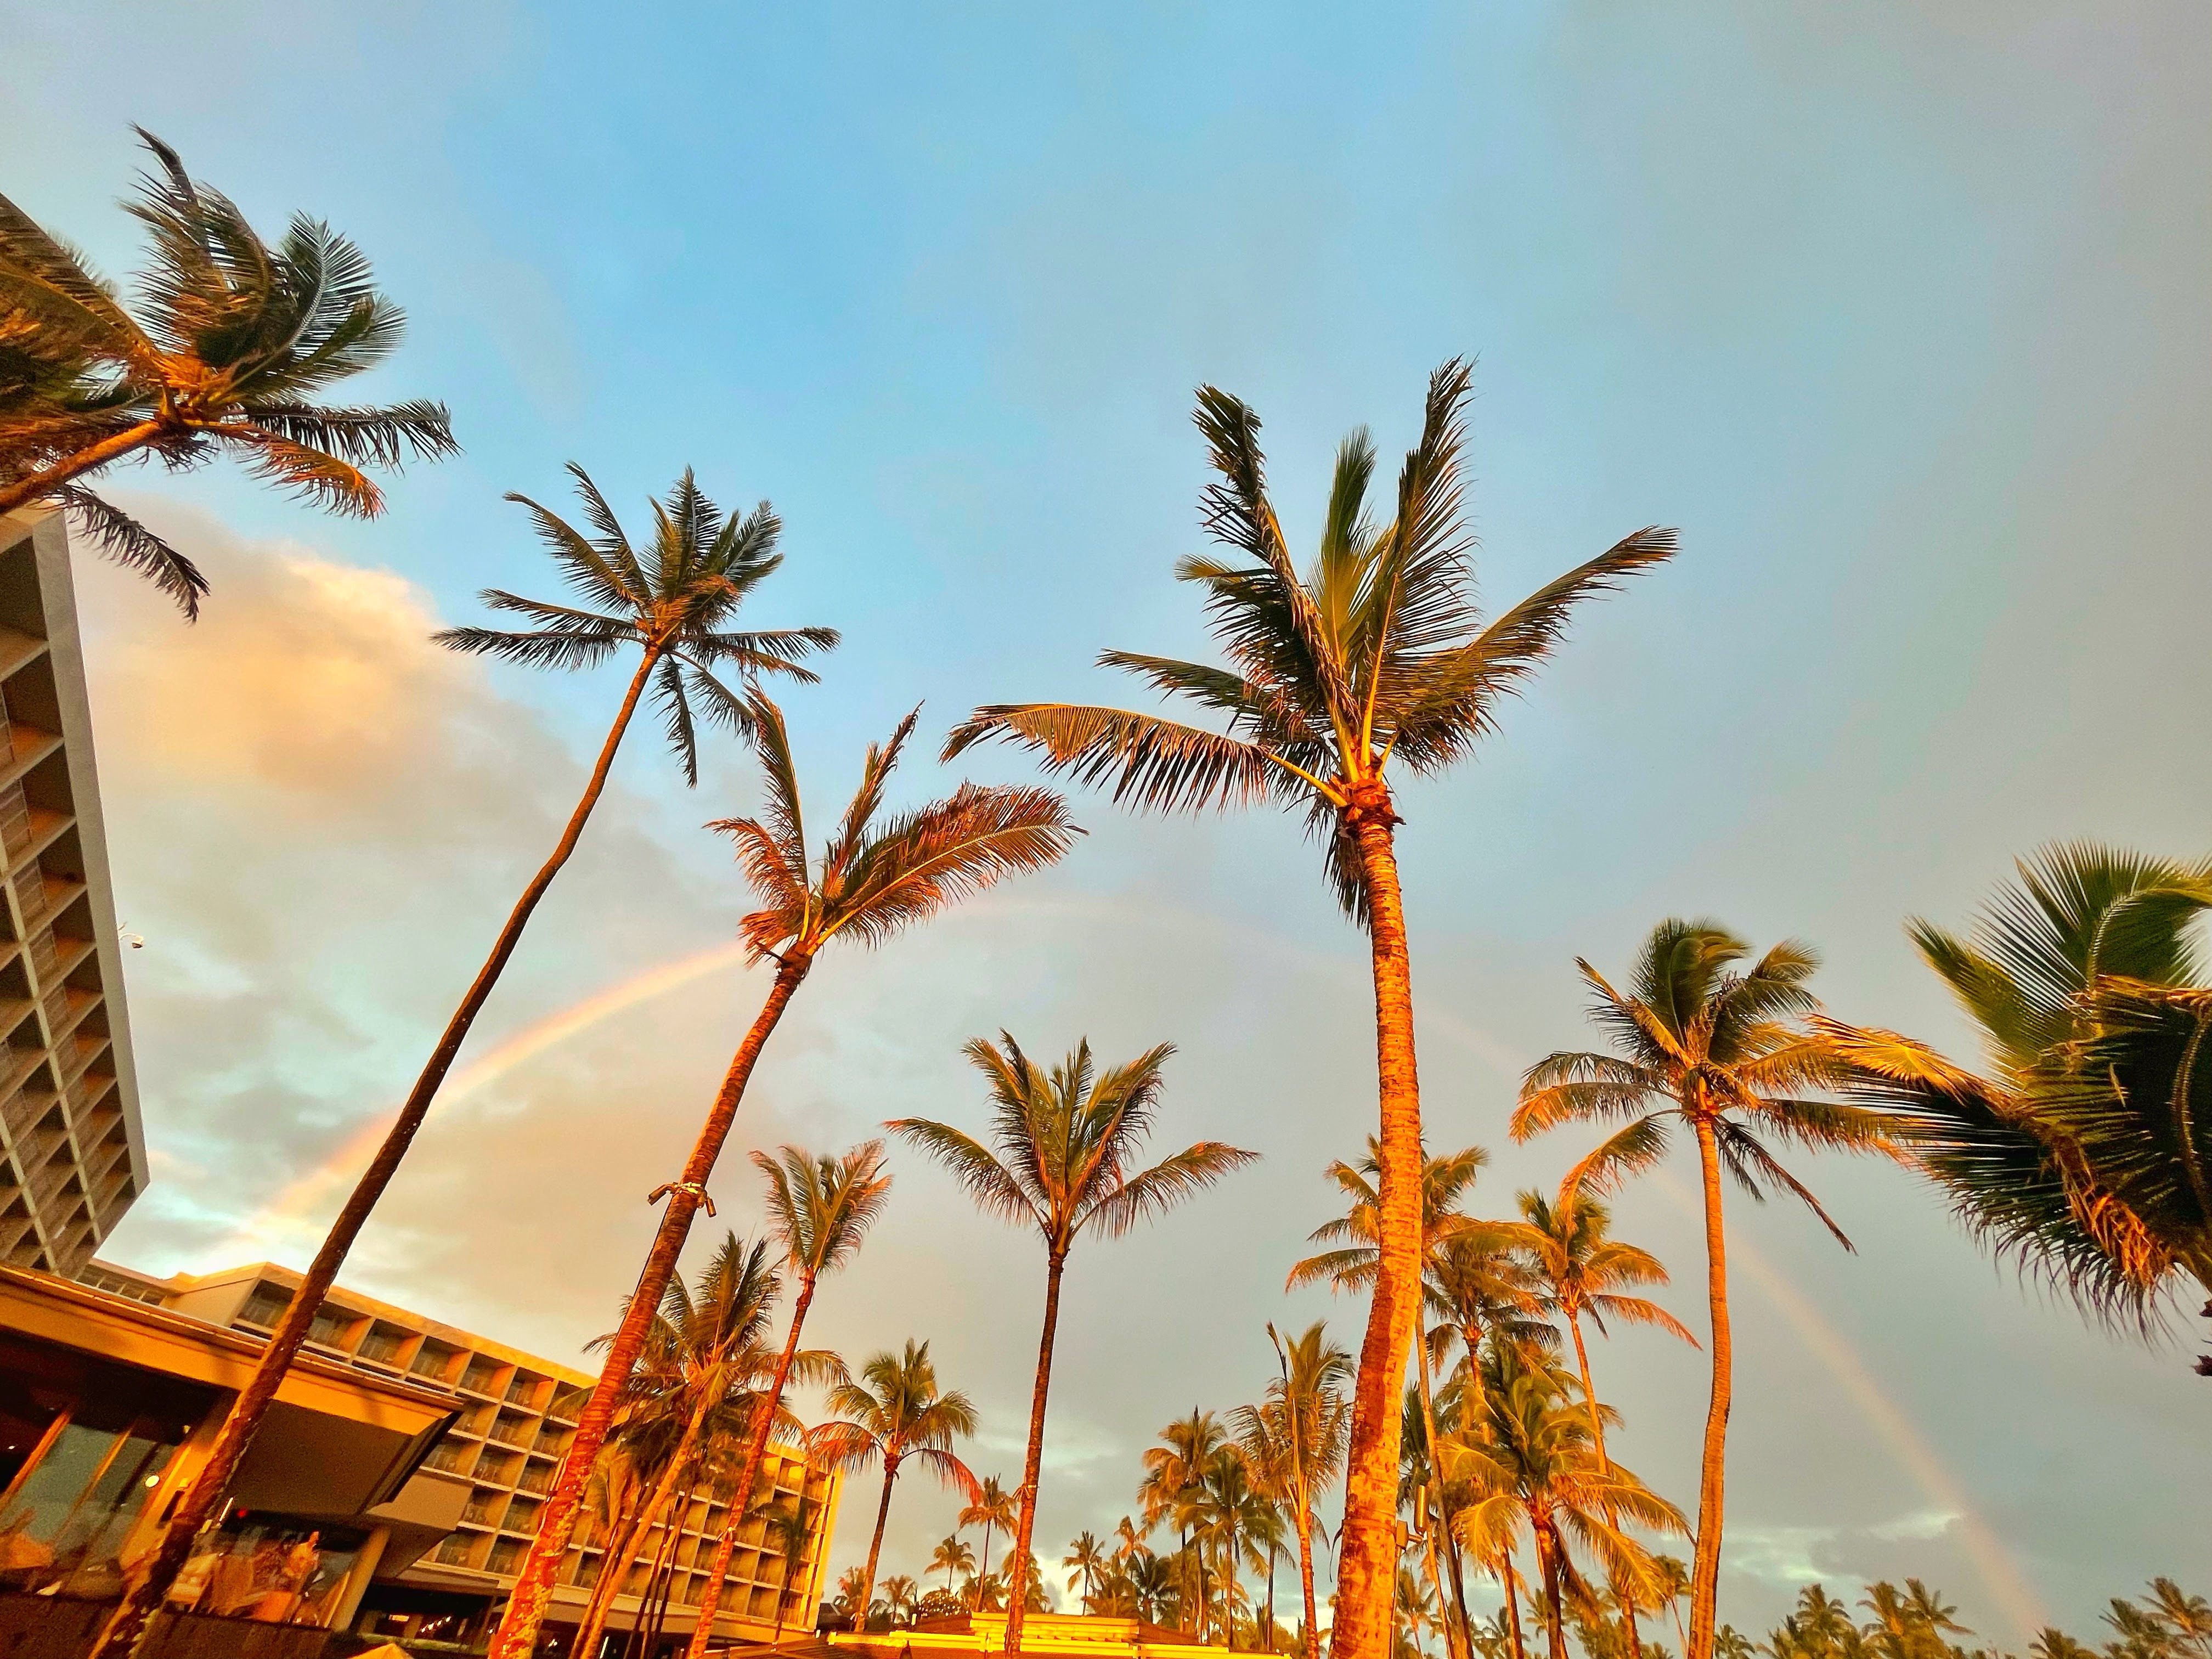 A rainbow appears over the palm trees at Turtle Bay Resort on the North Shore of Oahu